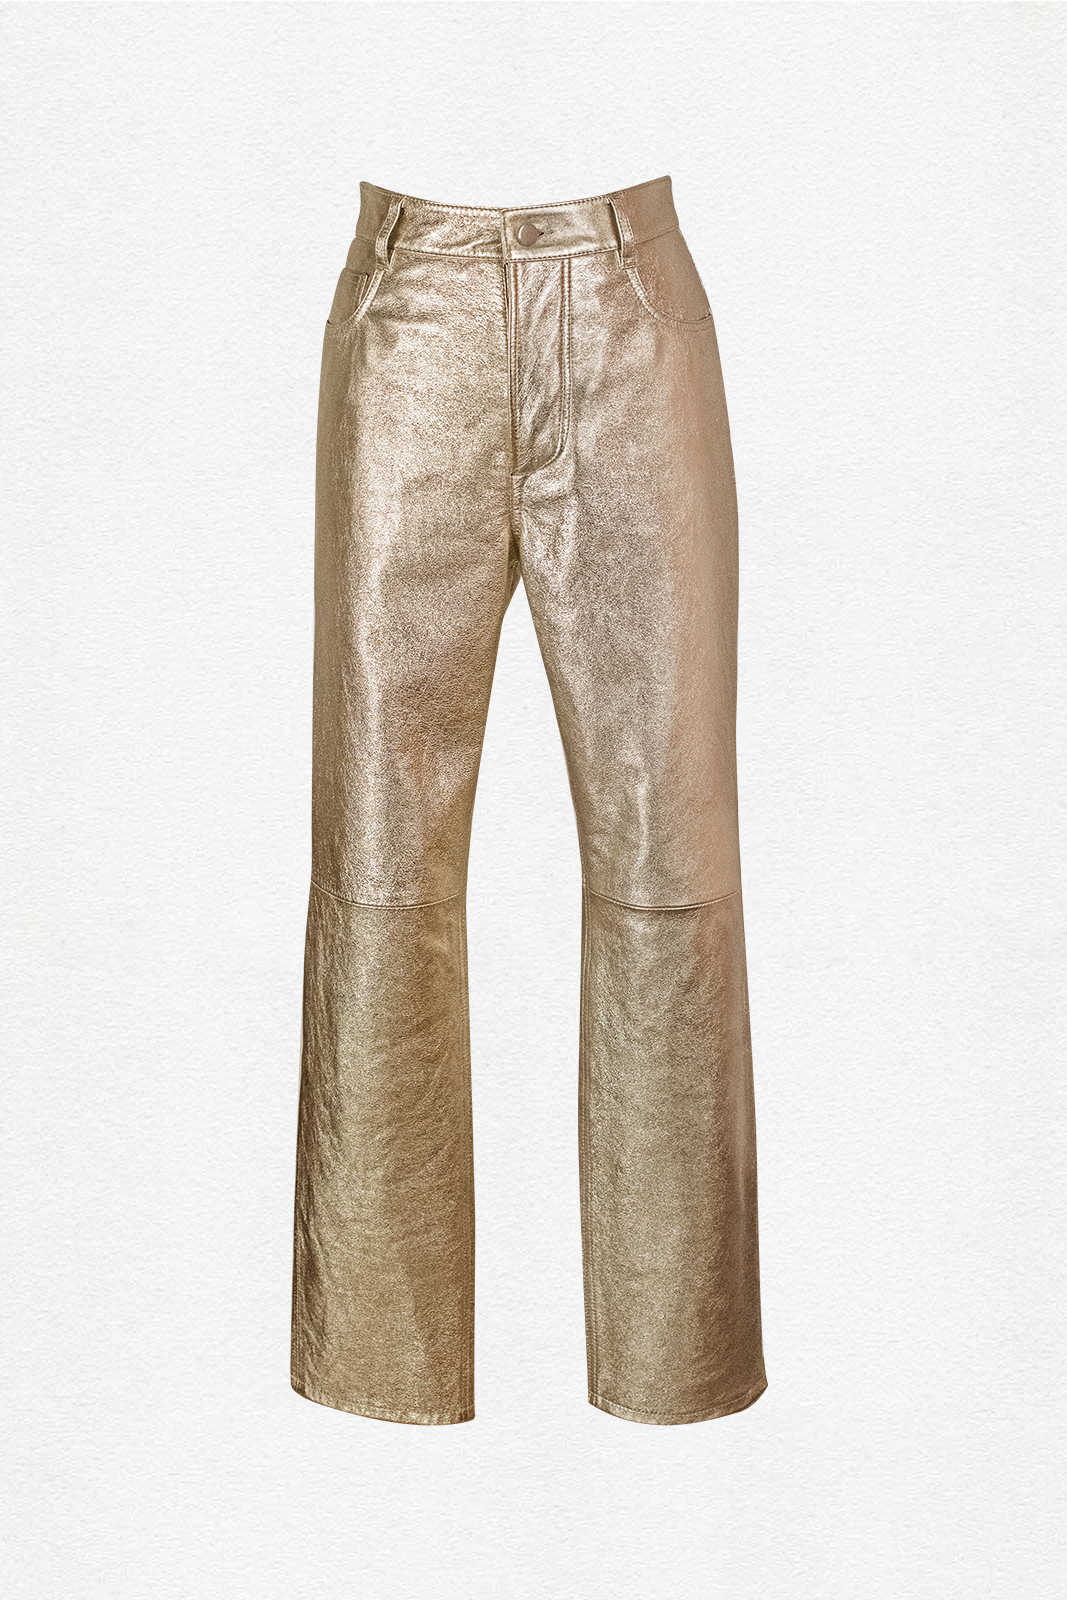 WILLIAM GOLD LEATHER TROUSERS